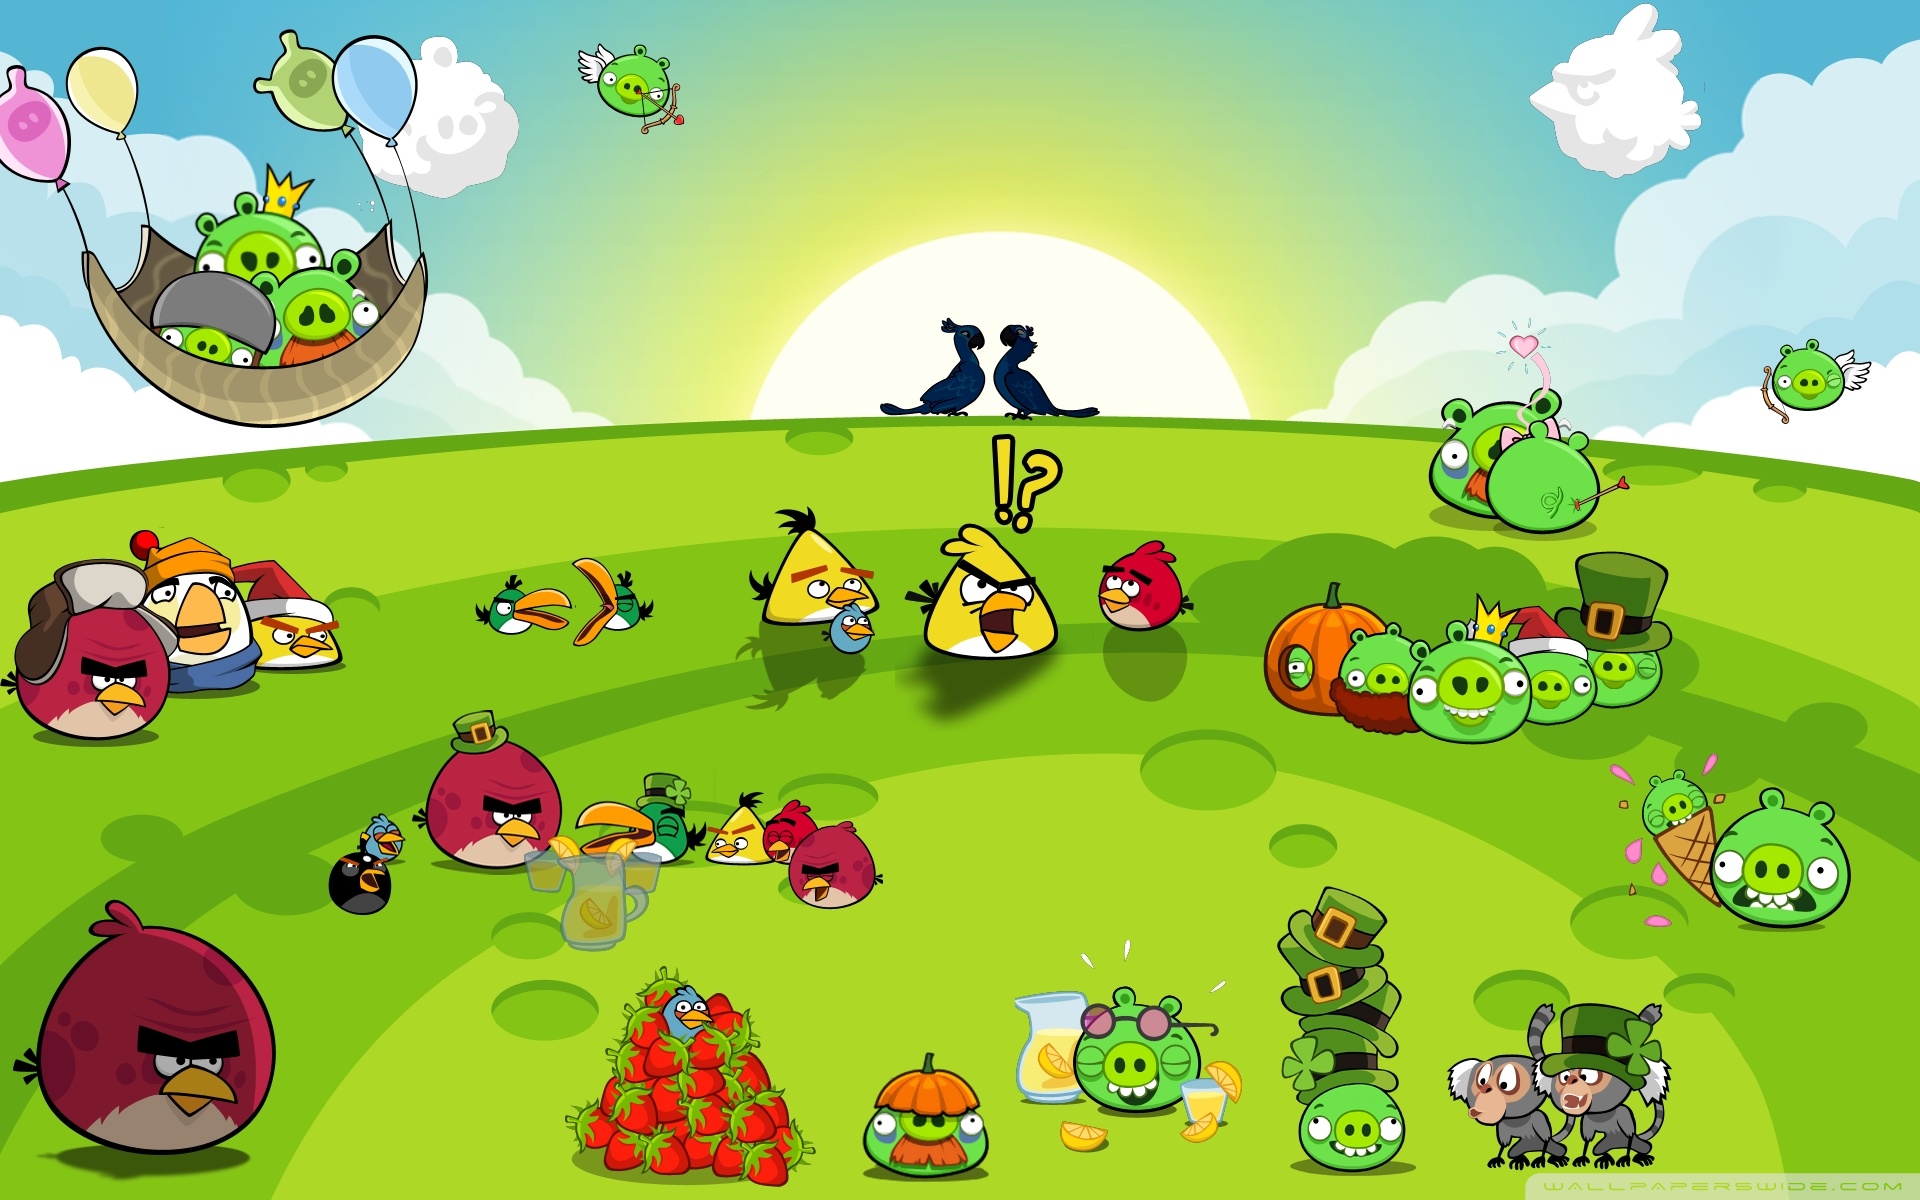 Download Angry Birds Hd Widescreen Wallpaper Full HD Wallpapers